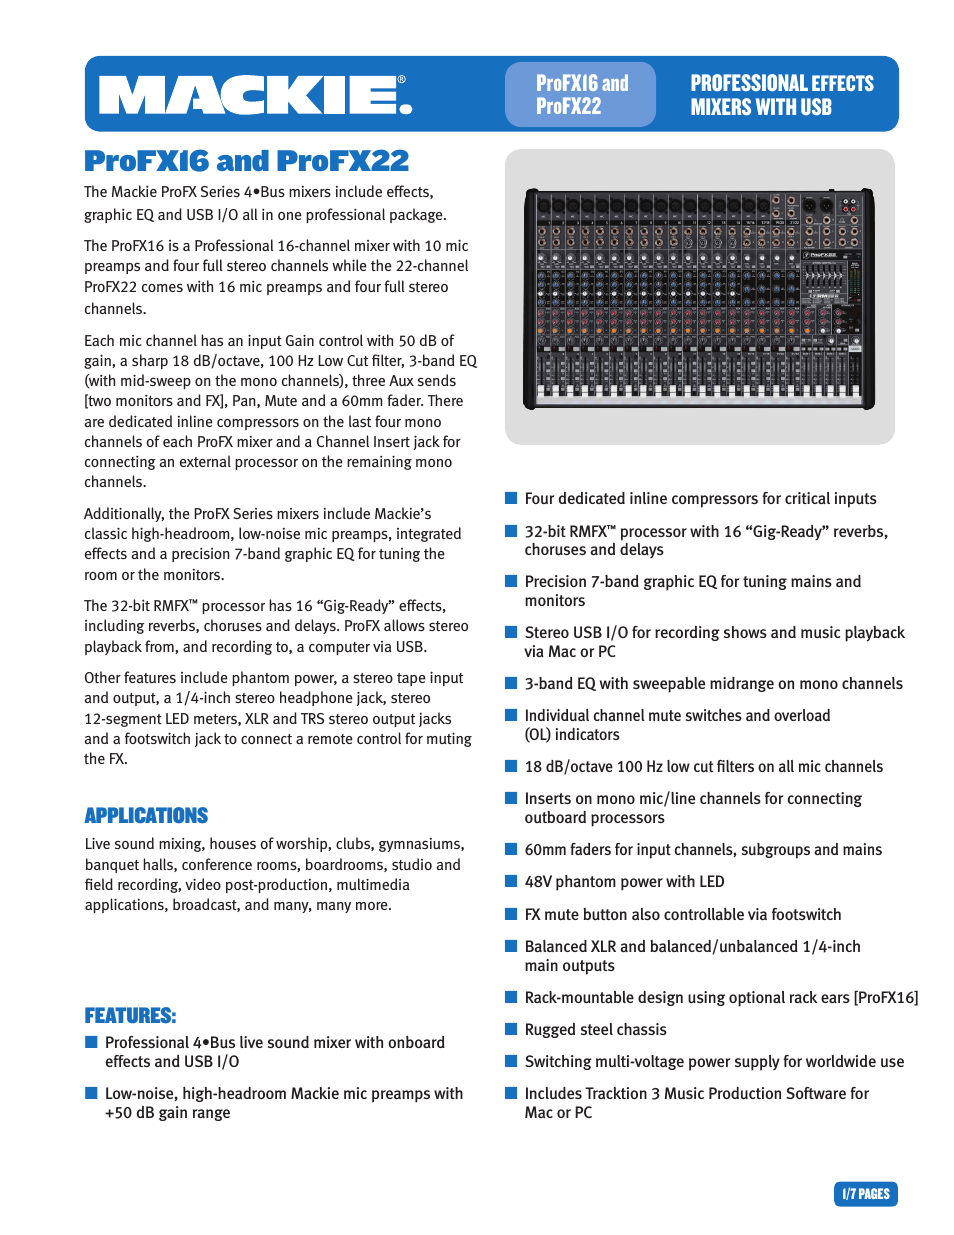 PROFESIONAL EFFECTS MIXER WITH USB PROFX22